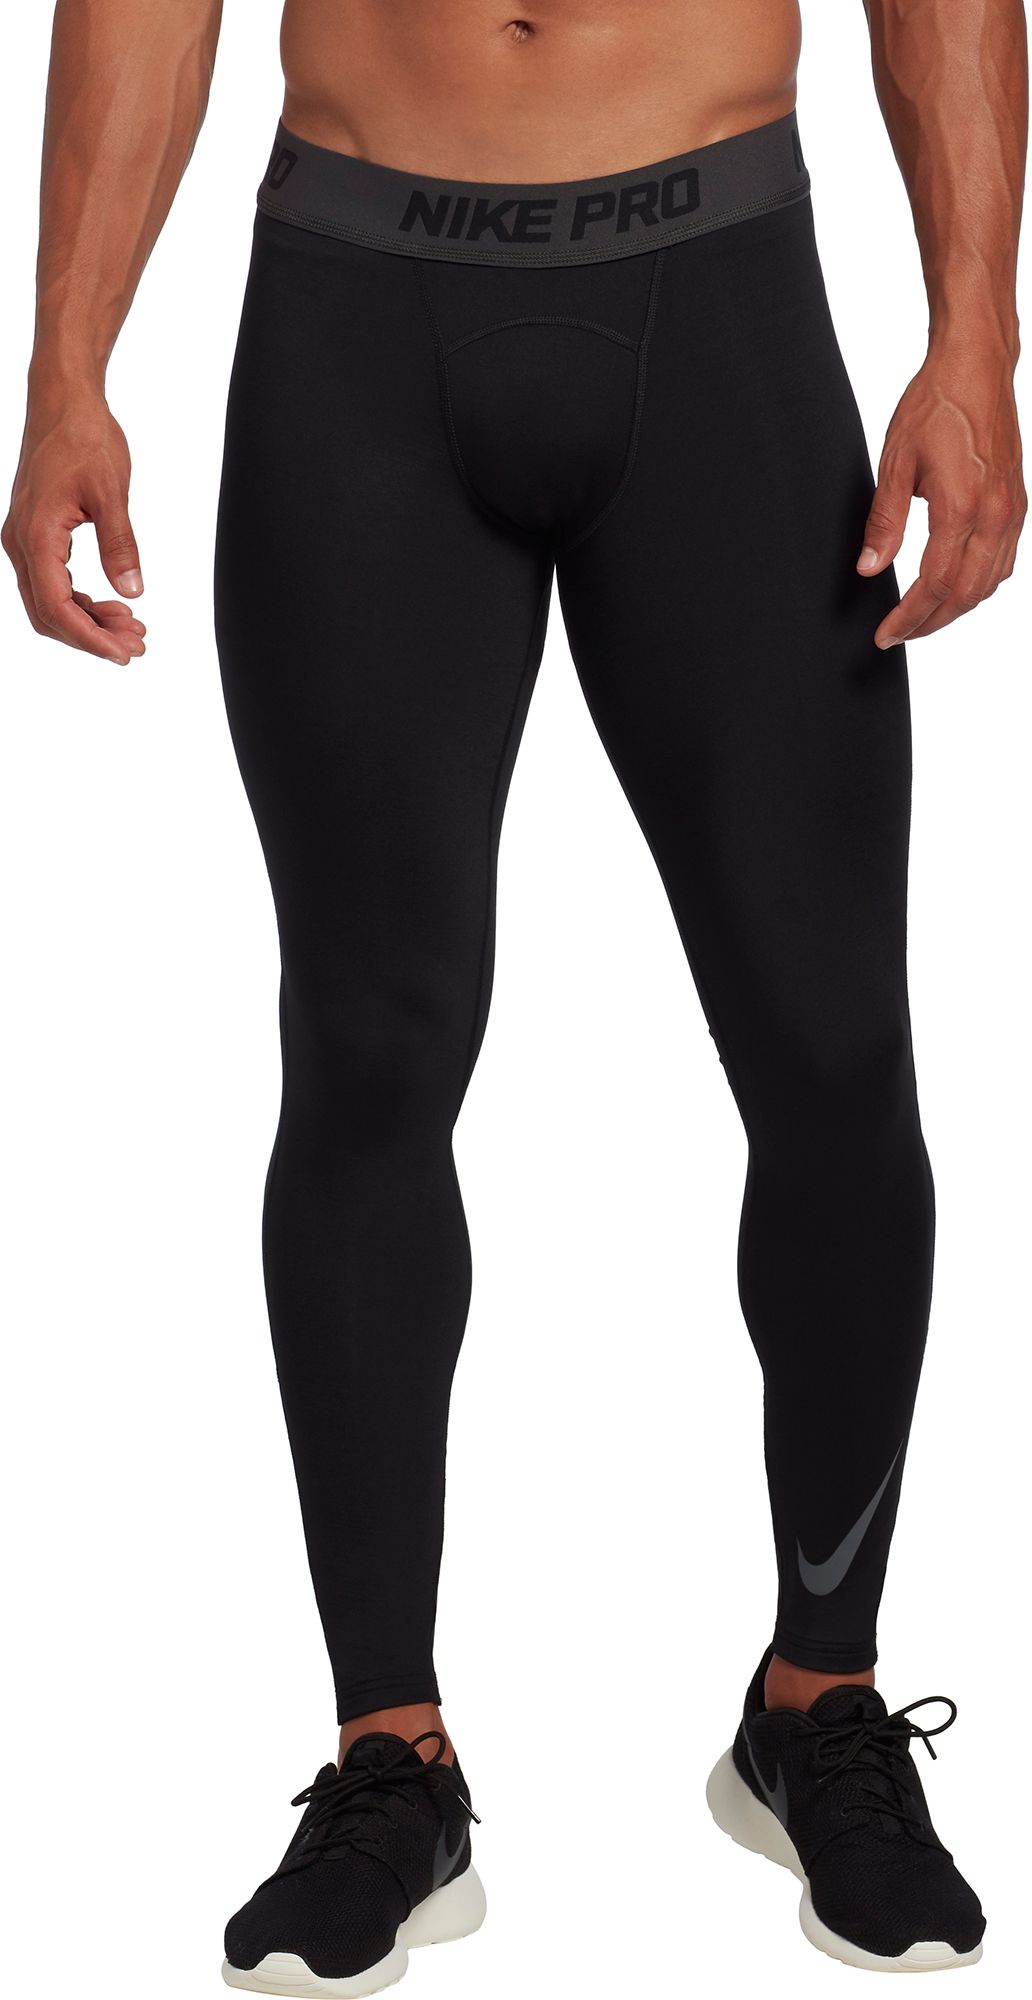 M Np Thrma Tght Men's Tights Nike - Ships Directly From Nike - image 1 of 4